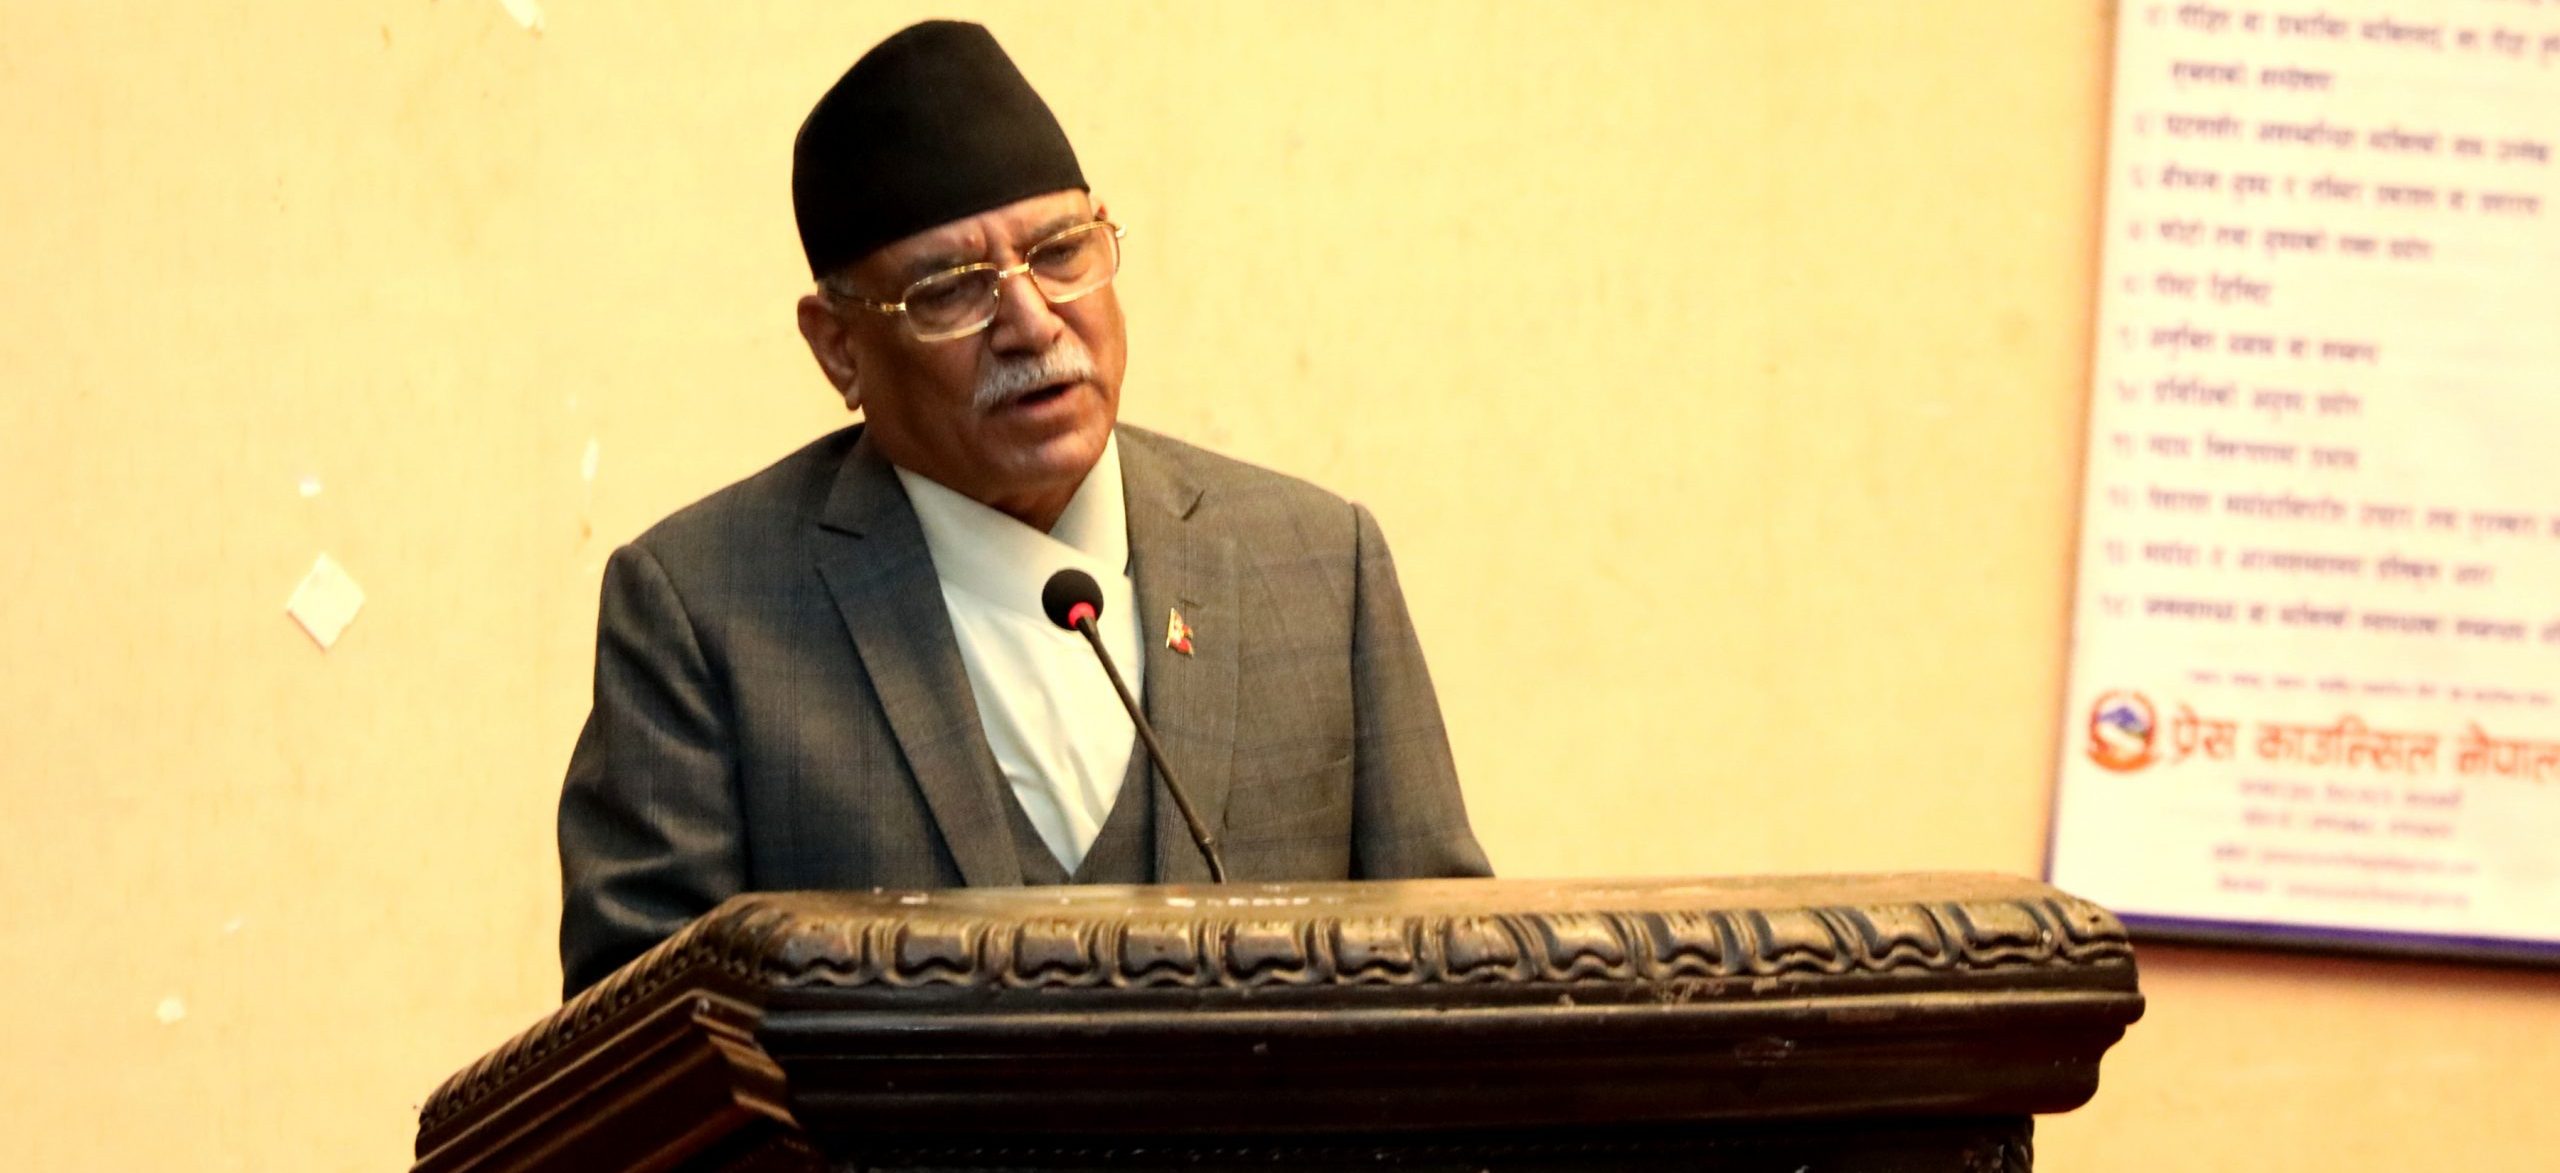 PM Dahal vows not to allow any curtailment and restriction on press freedom